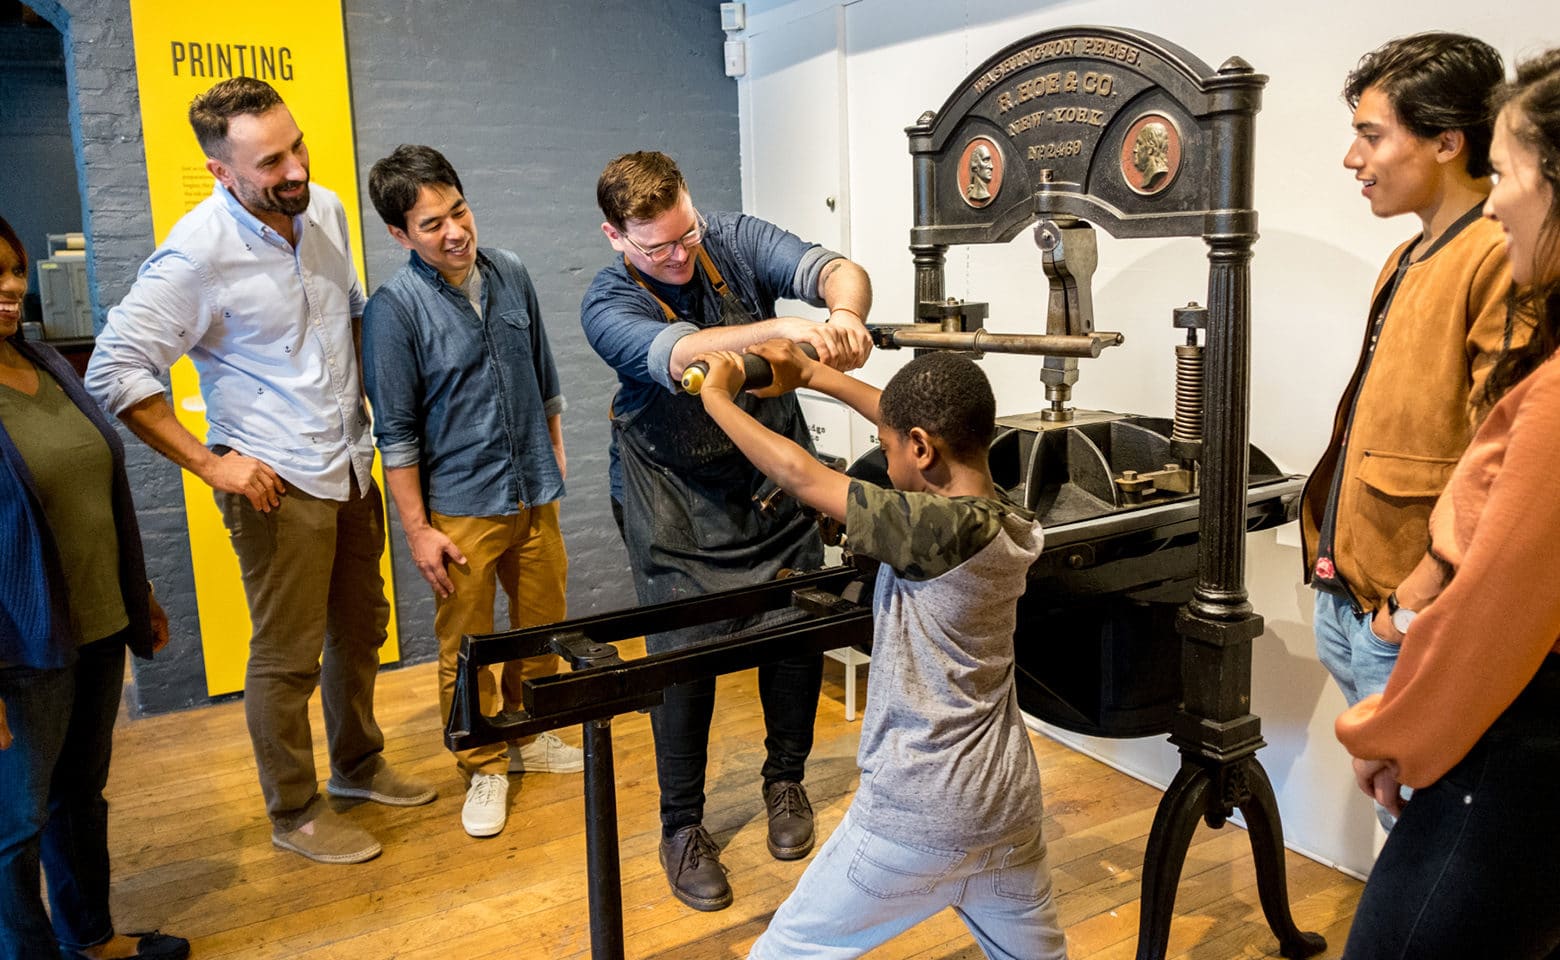 Printing demonstration at South Street Seaport Museum